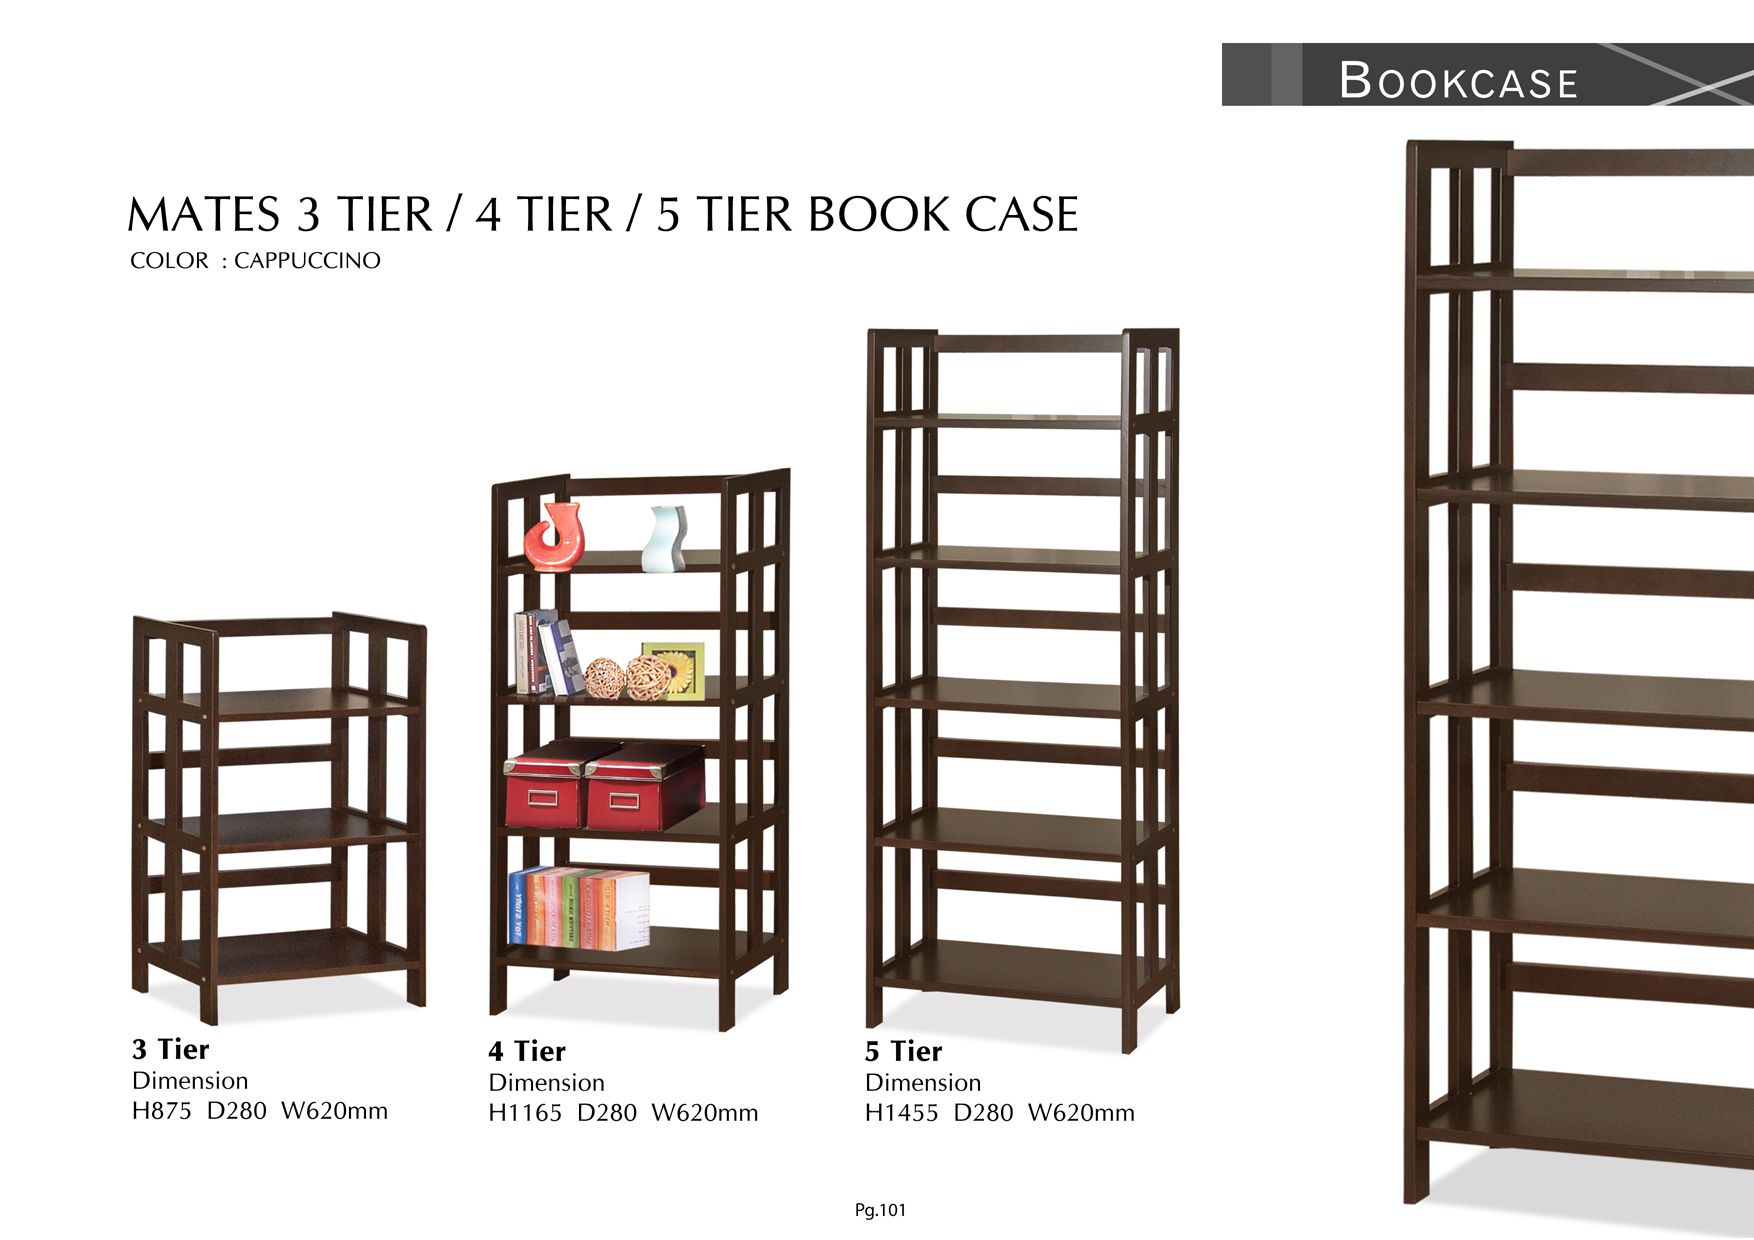 Product: PG101. MATES TIER BOOK CASE